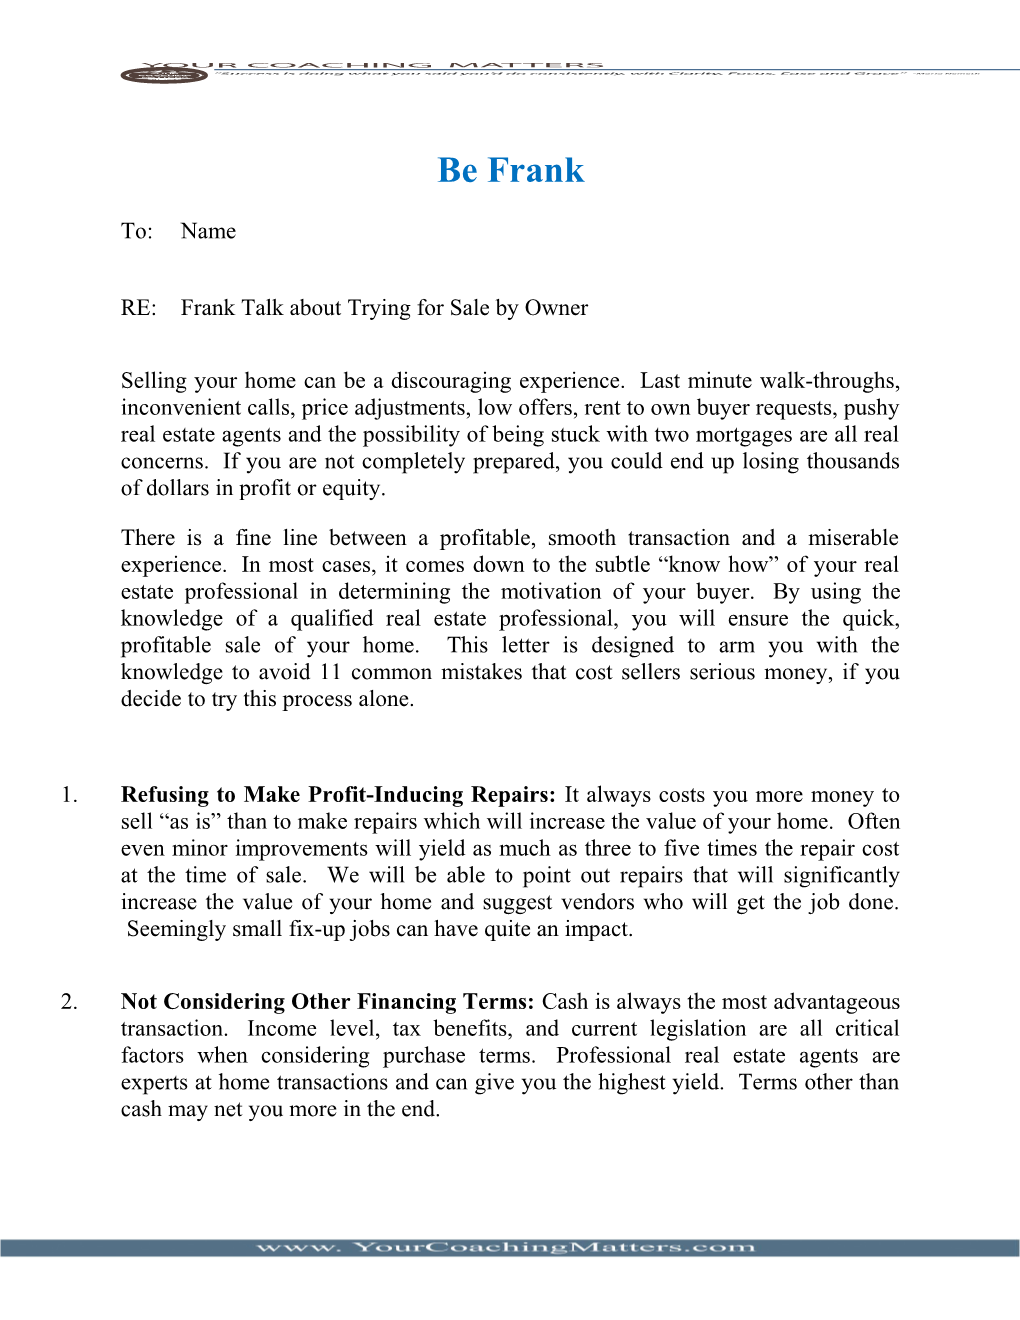 RE:Frank Talk About Trying for Sale by Owner